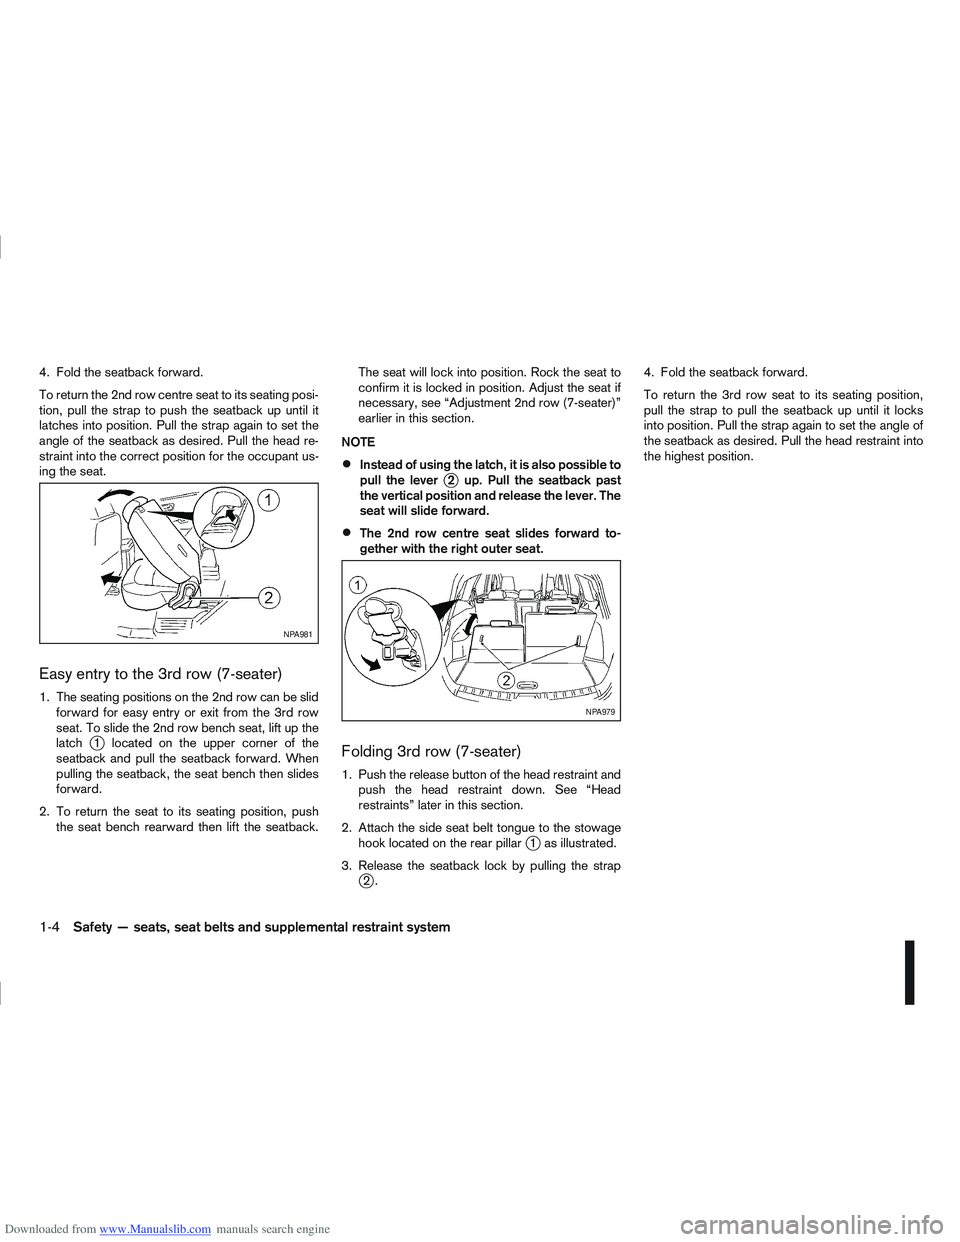 NISSAN QASHQAI 2007 Owners Manual Downloaded from www.Manualslib.com manuals search engine 4. Fold the seatback forward.
To return the 2nd row centre seat to its seating posi-
tion, pull the strap to push the seatback up until it
latc